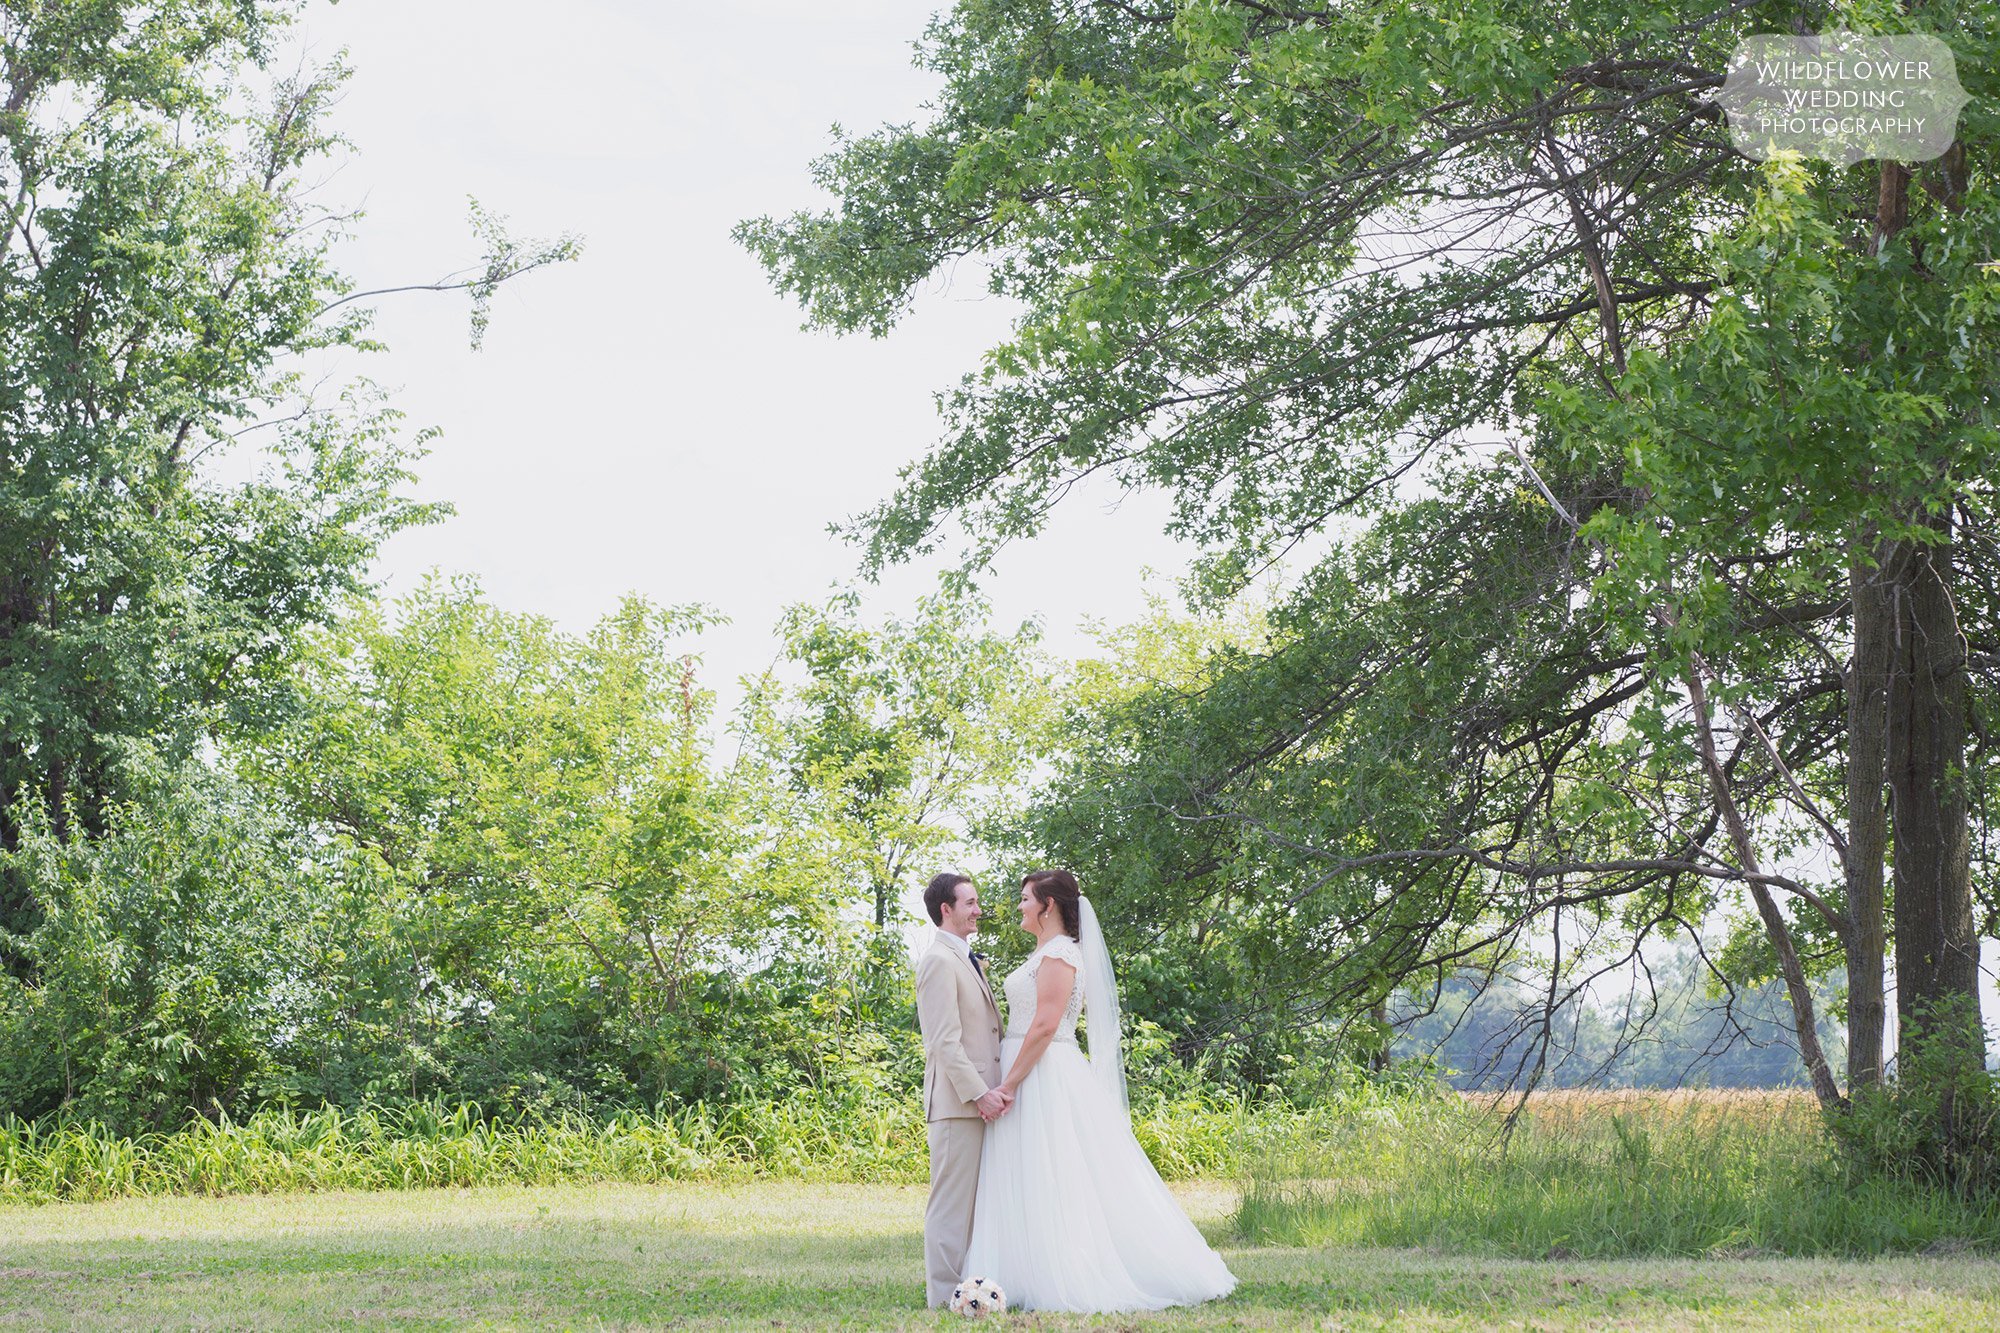 The bride and groom pose in a field during their outdoor country wedding in Columbia, MO in the summer.